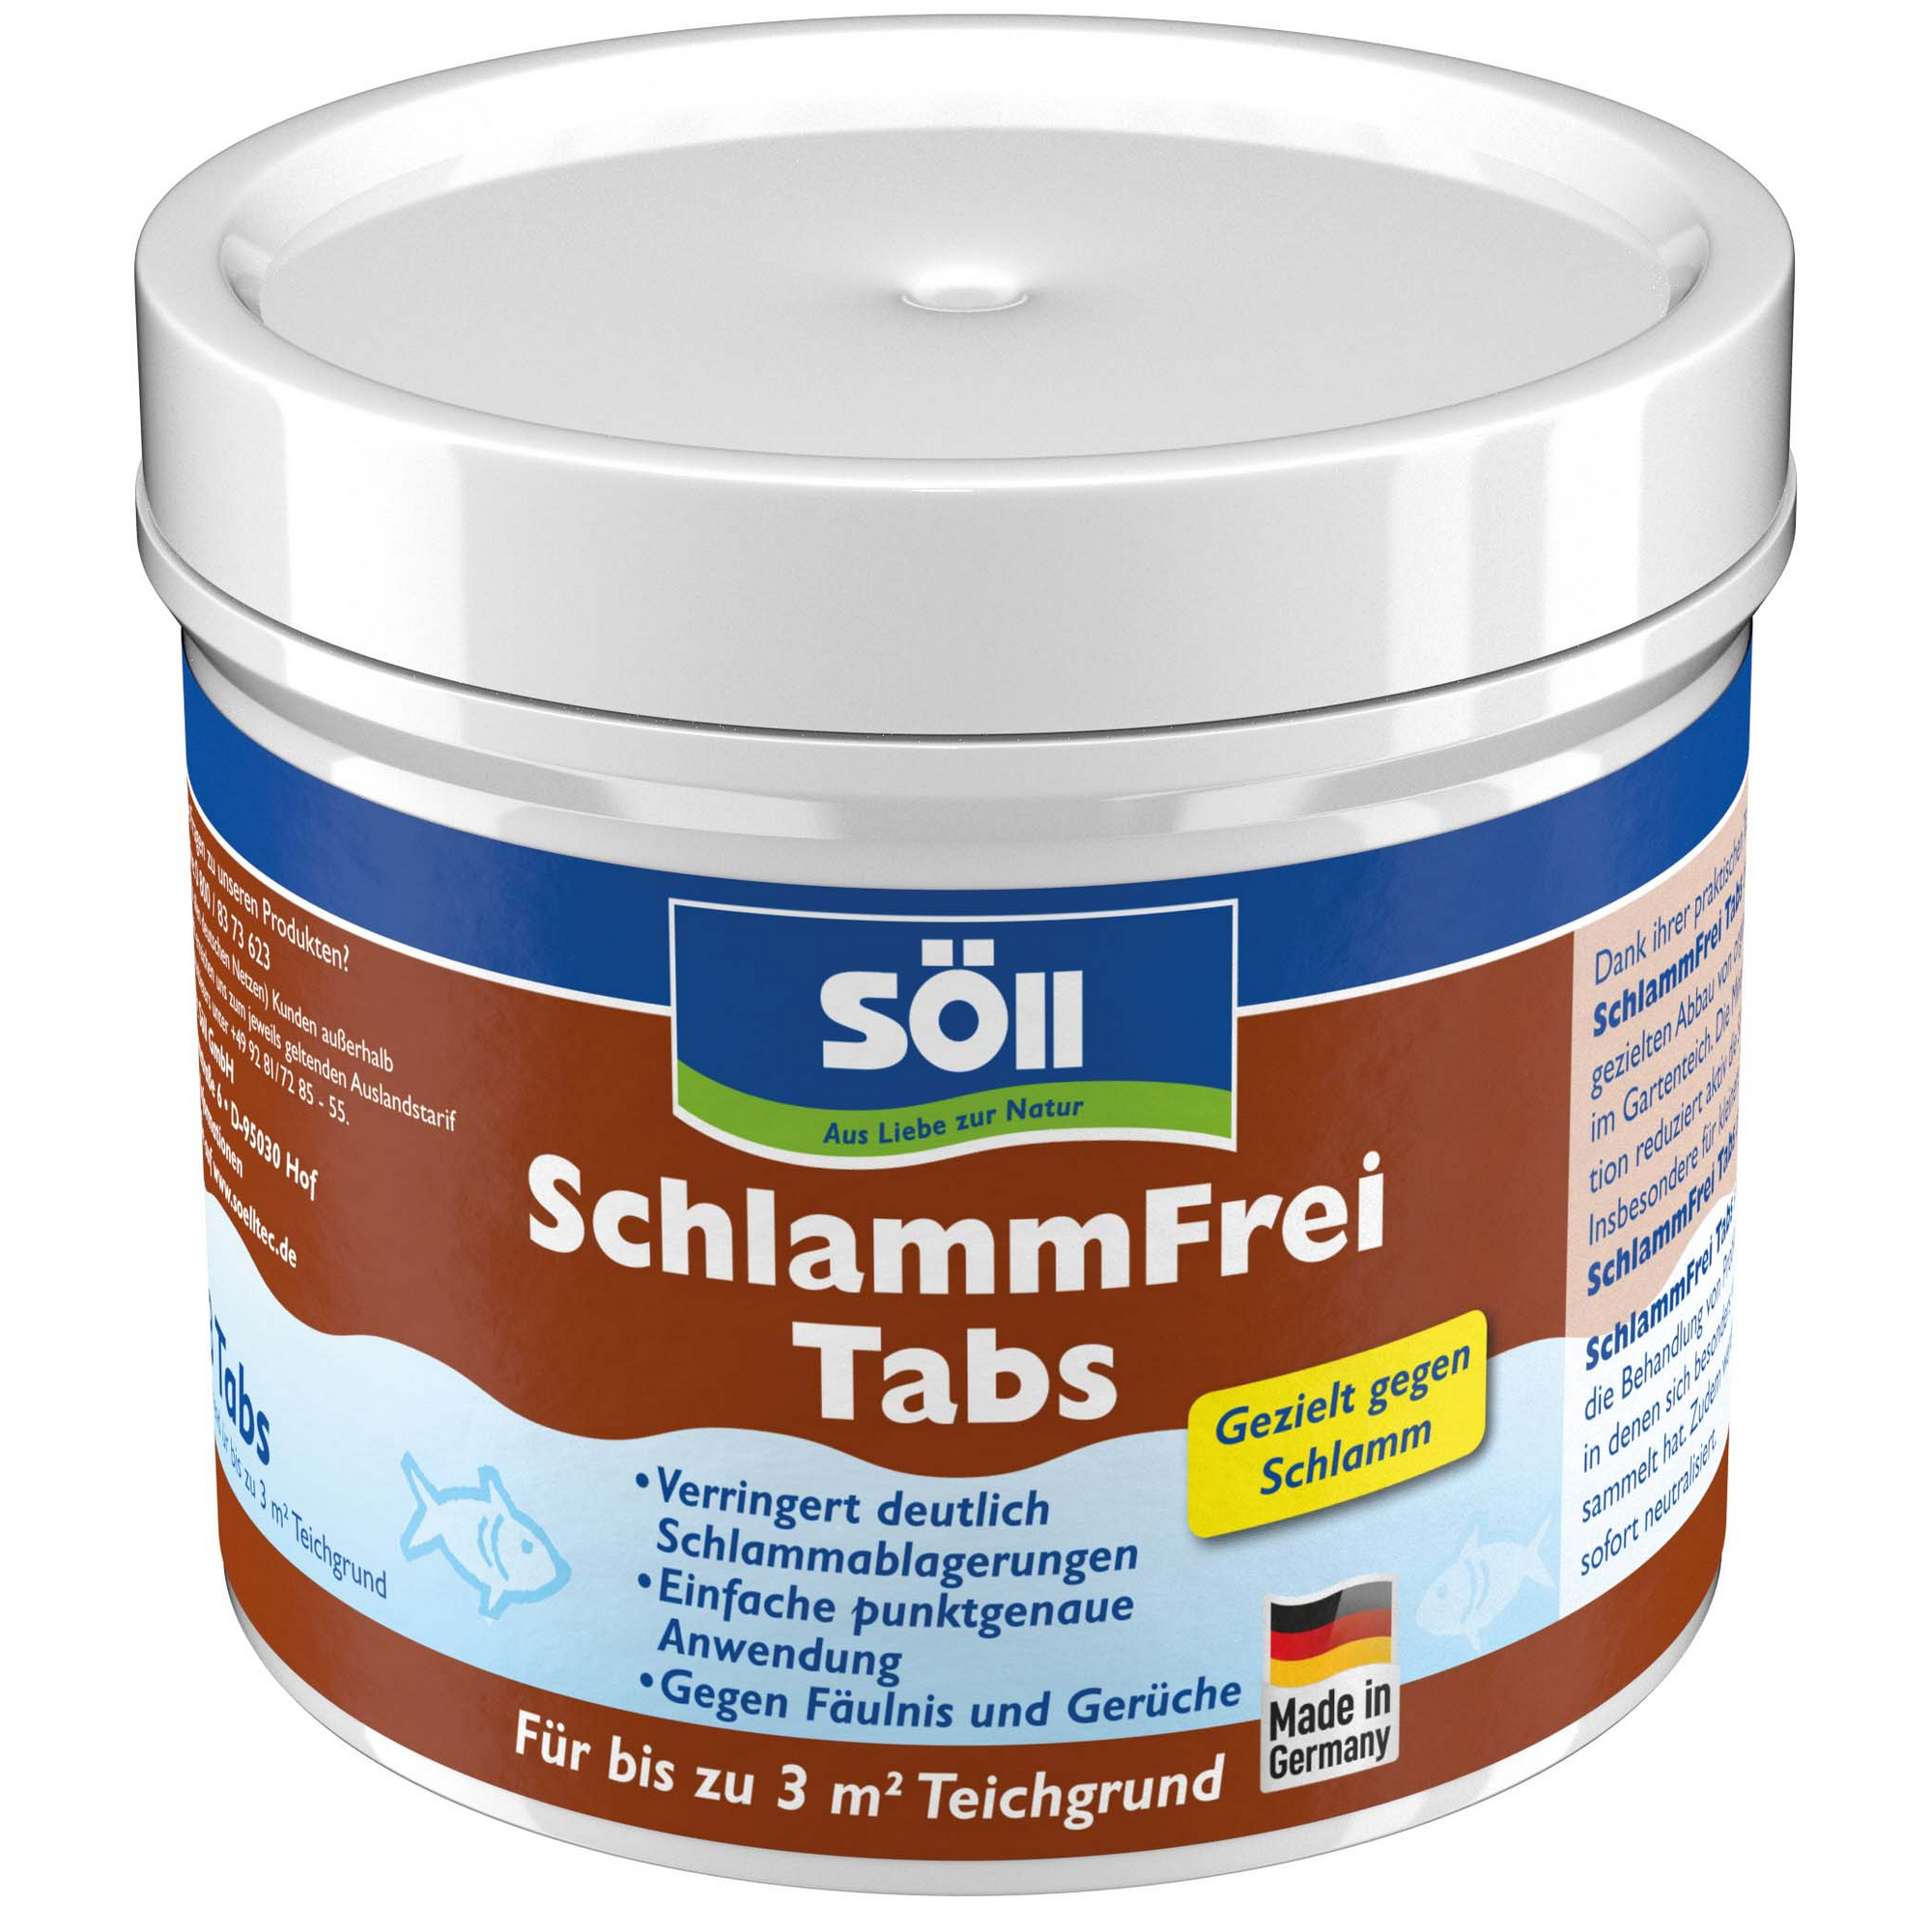 Schlamm-Frei Tabs 3 Tabs + product picture